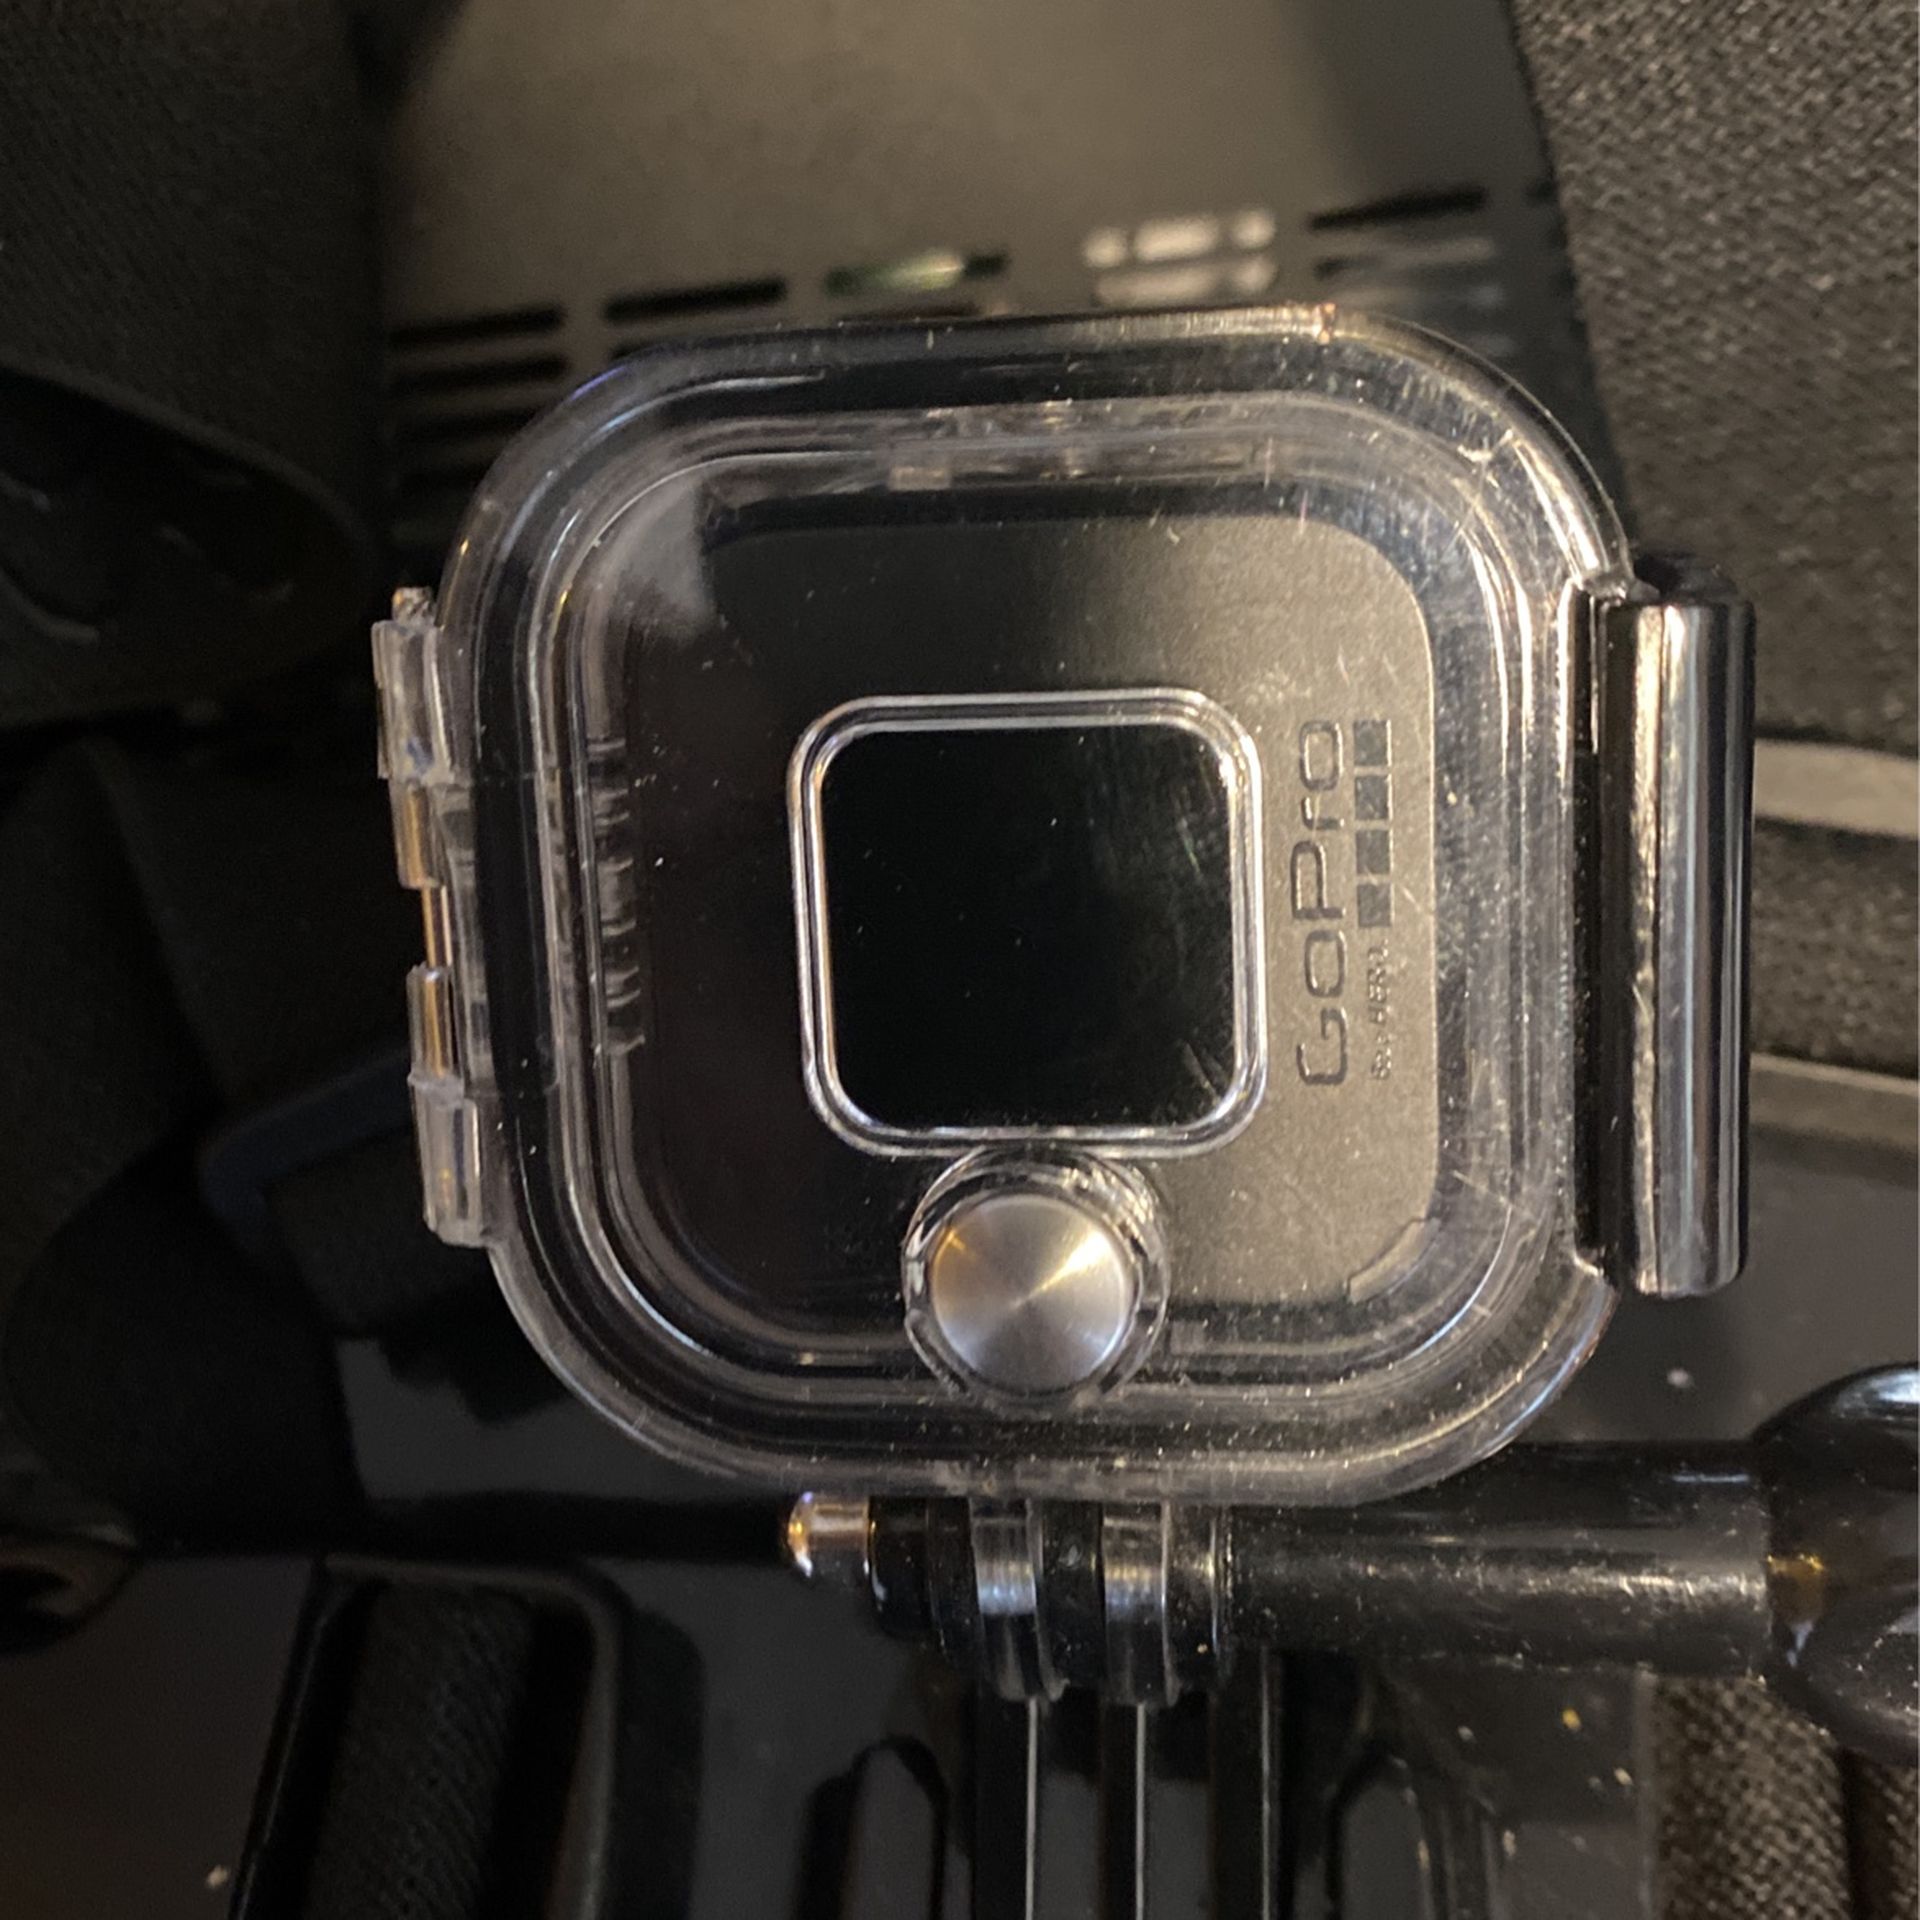 GoPro Hero4 Session With Extras